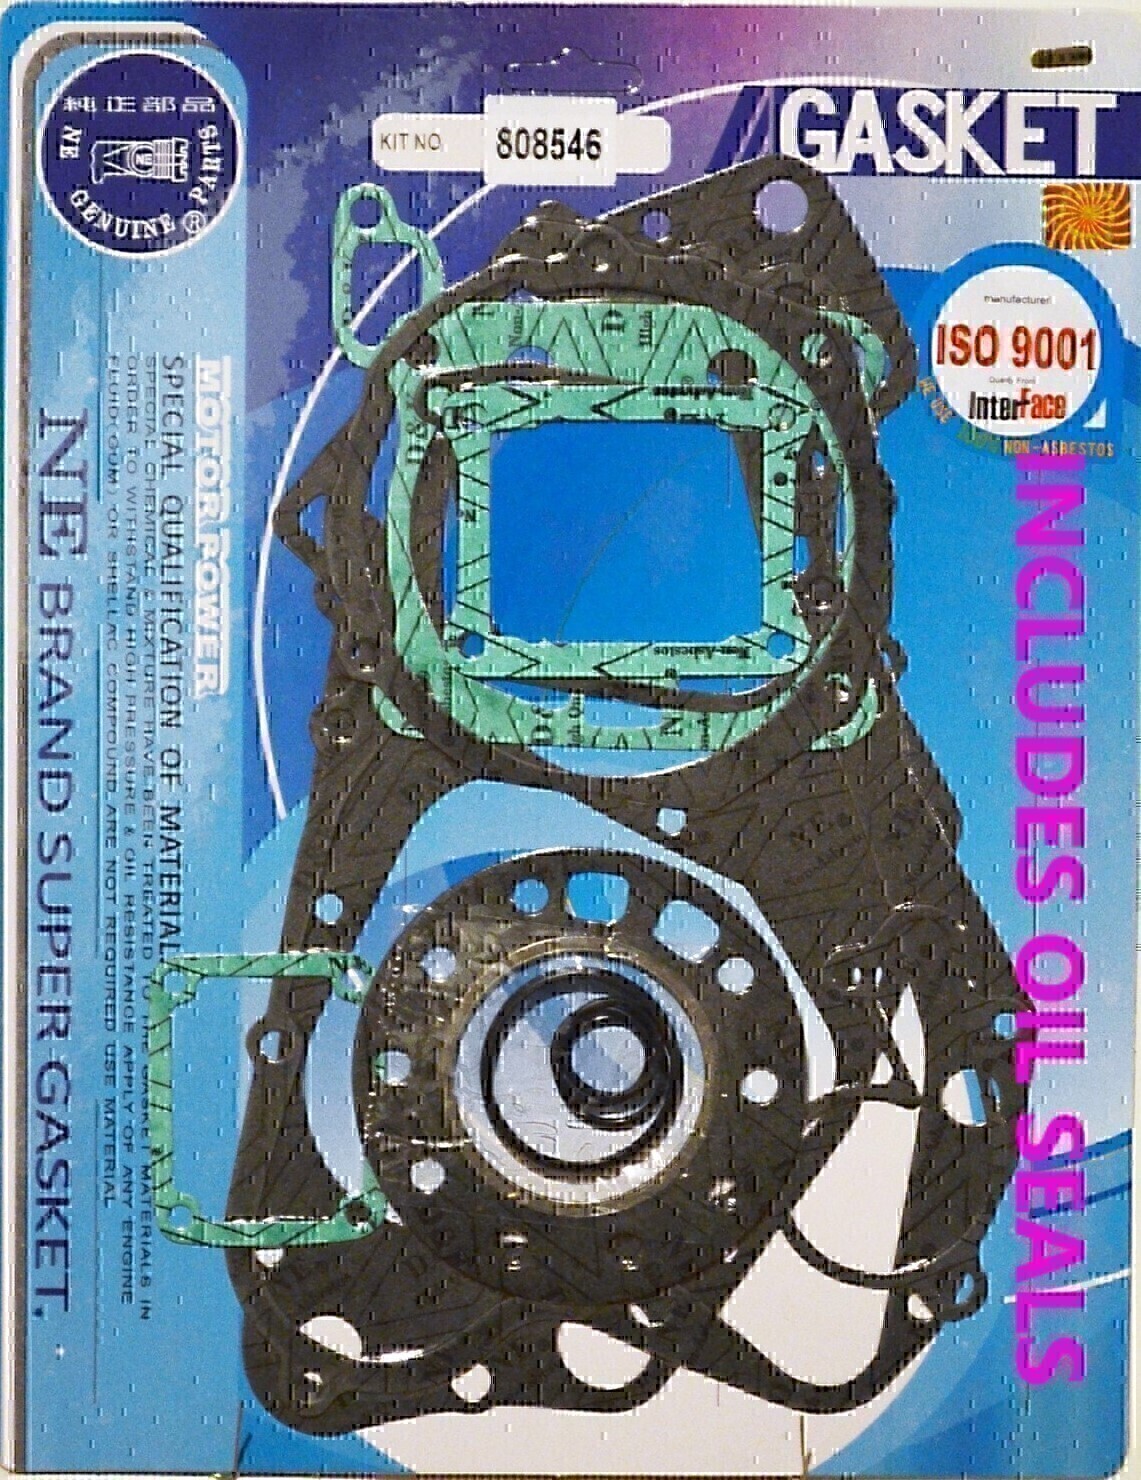 COMPLETE GASKET & OIL SEAL KIT FOR SUZUKI RM125 RM 125 1987 1988